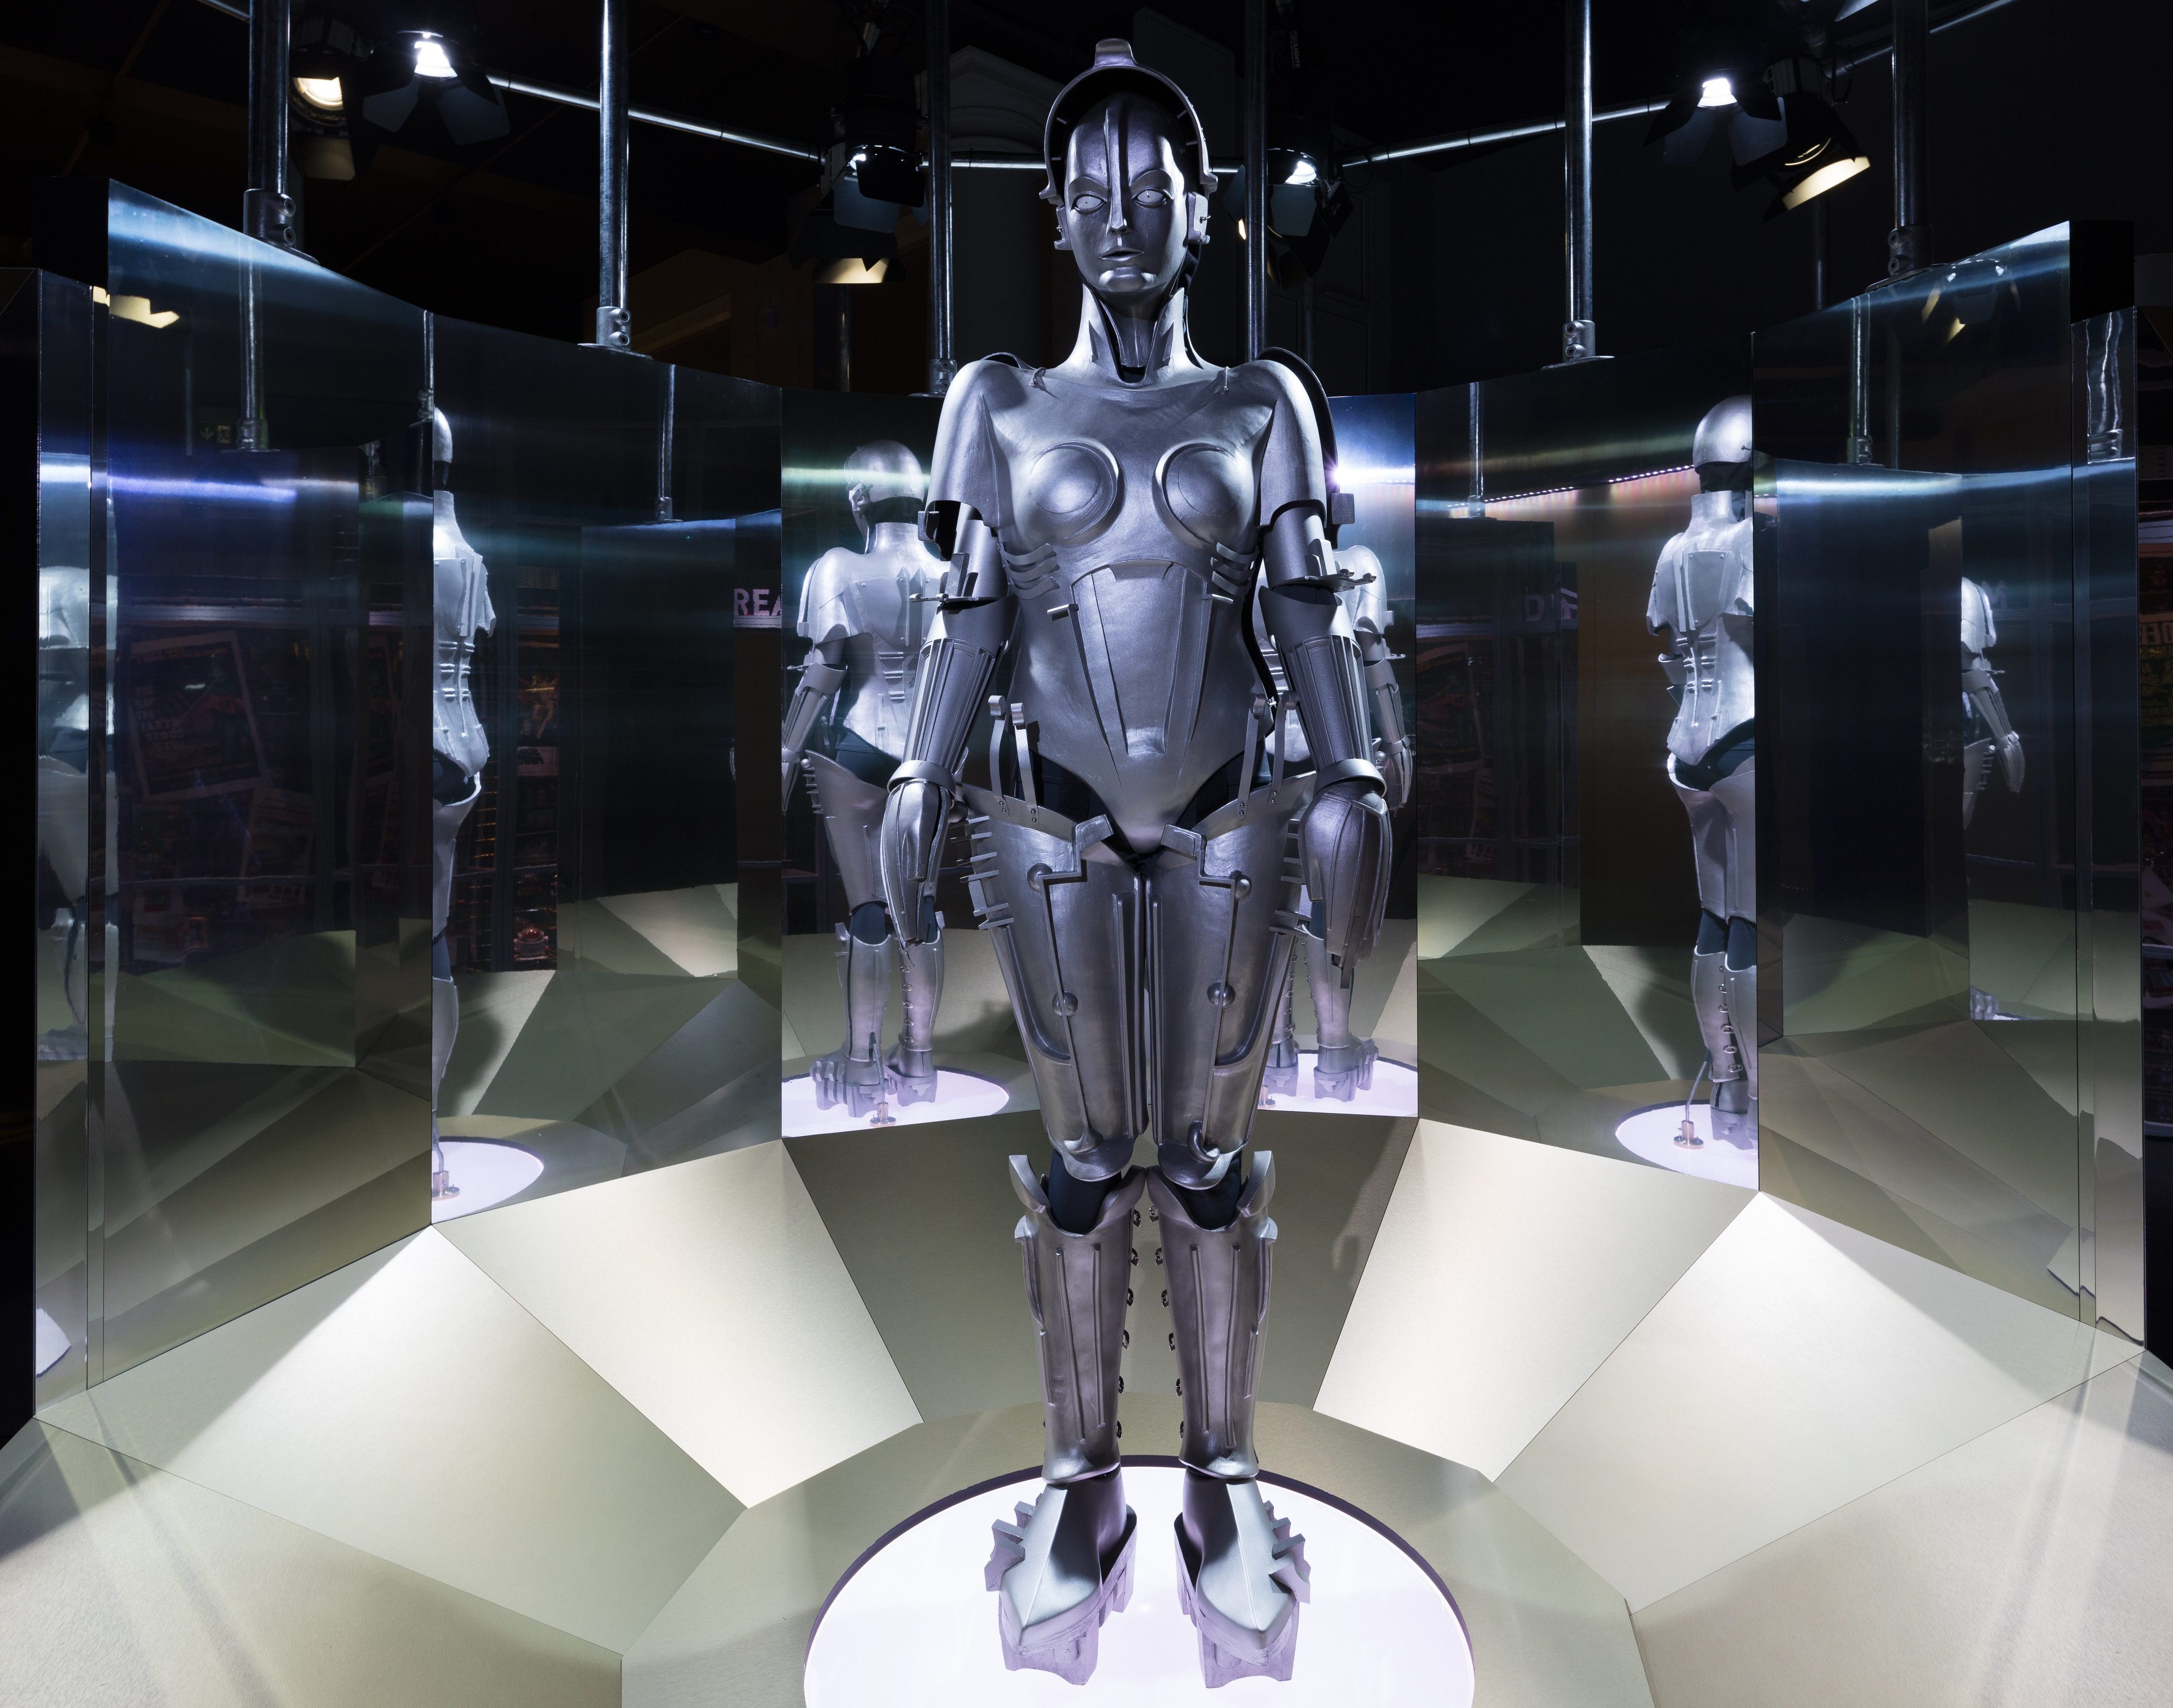 Model of Maria in the Dream section of the Robots exhibition © Plastiques Photography, courtesy of the Science Museum